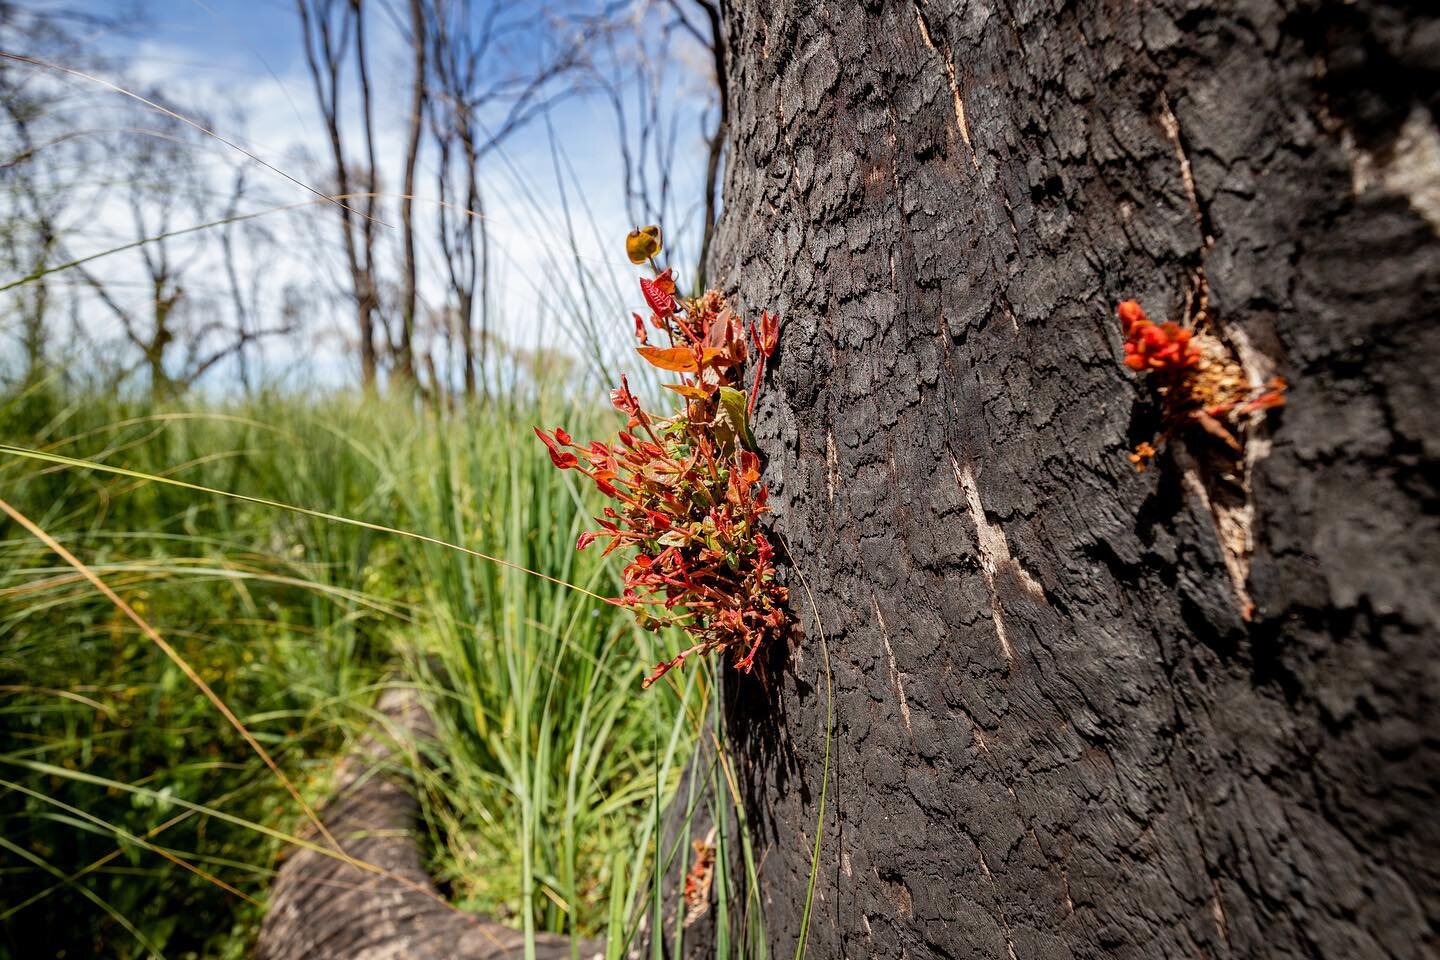 The Australian bush has always been shaped by fire, and our trees have evolved special adaptations to cope with seasonal bushfires. This is an epicormic shoot and it grows from a bud that hides protected beneath the thick bark of a gum myrtle tree. T